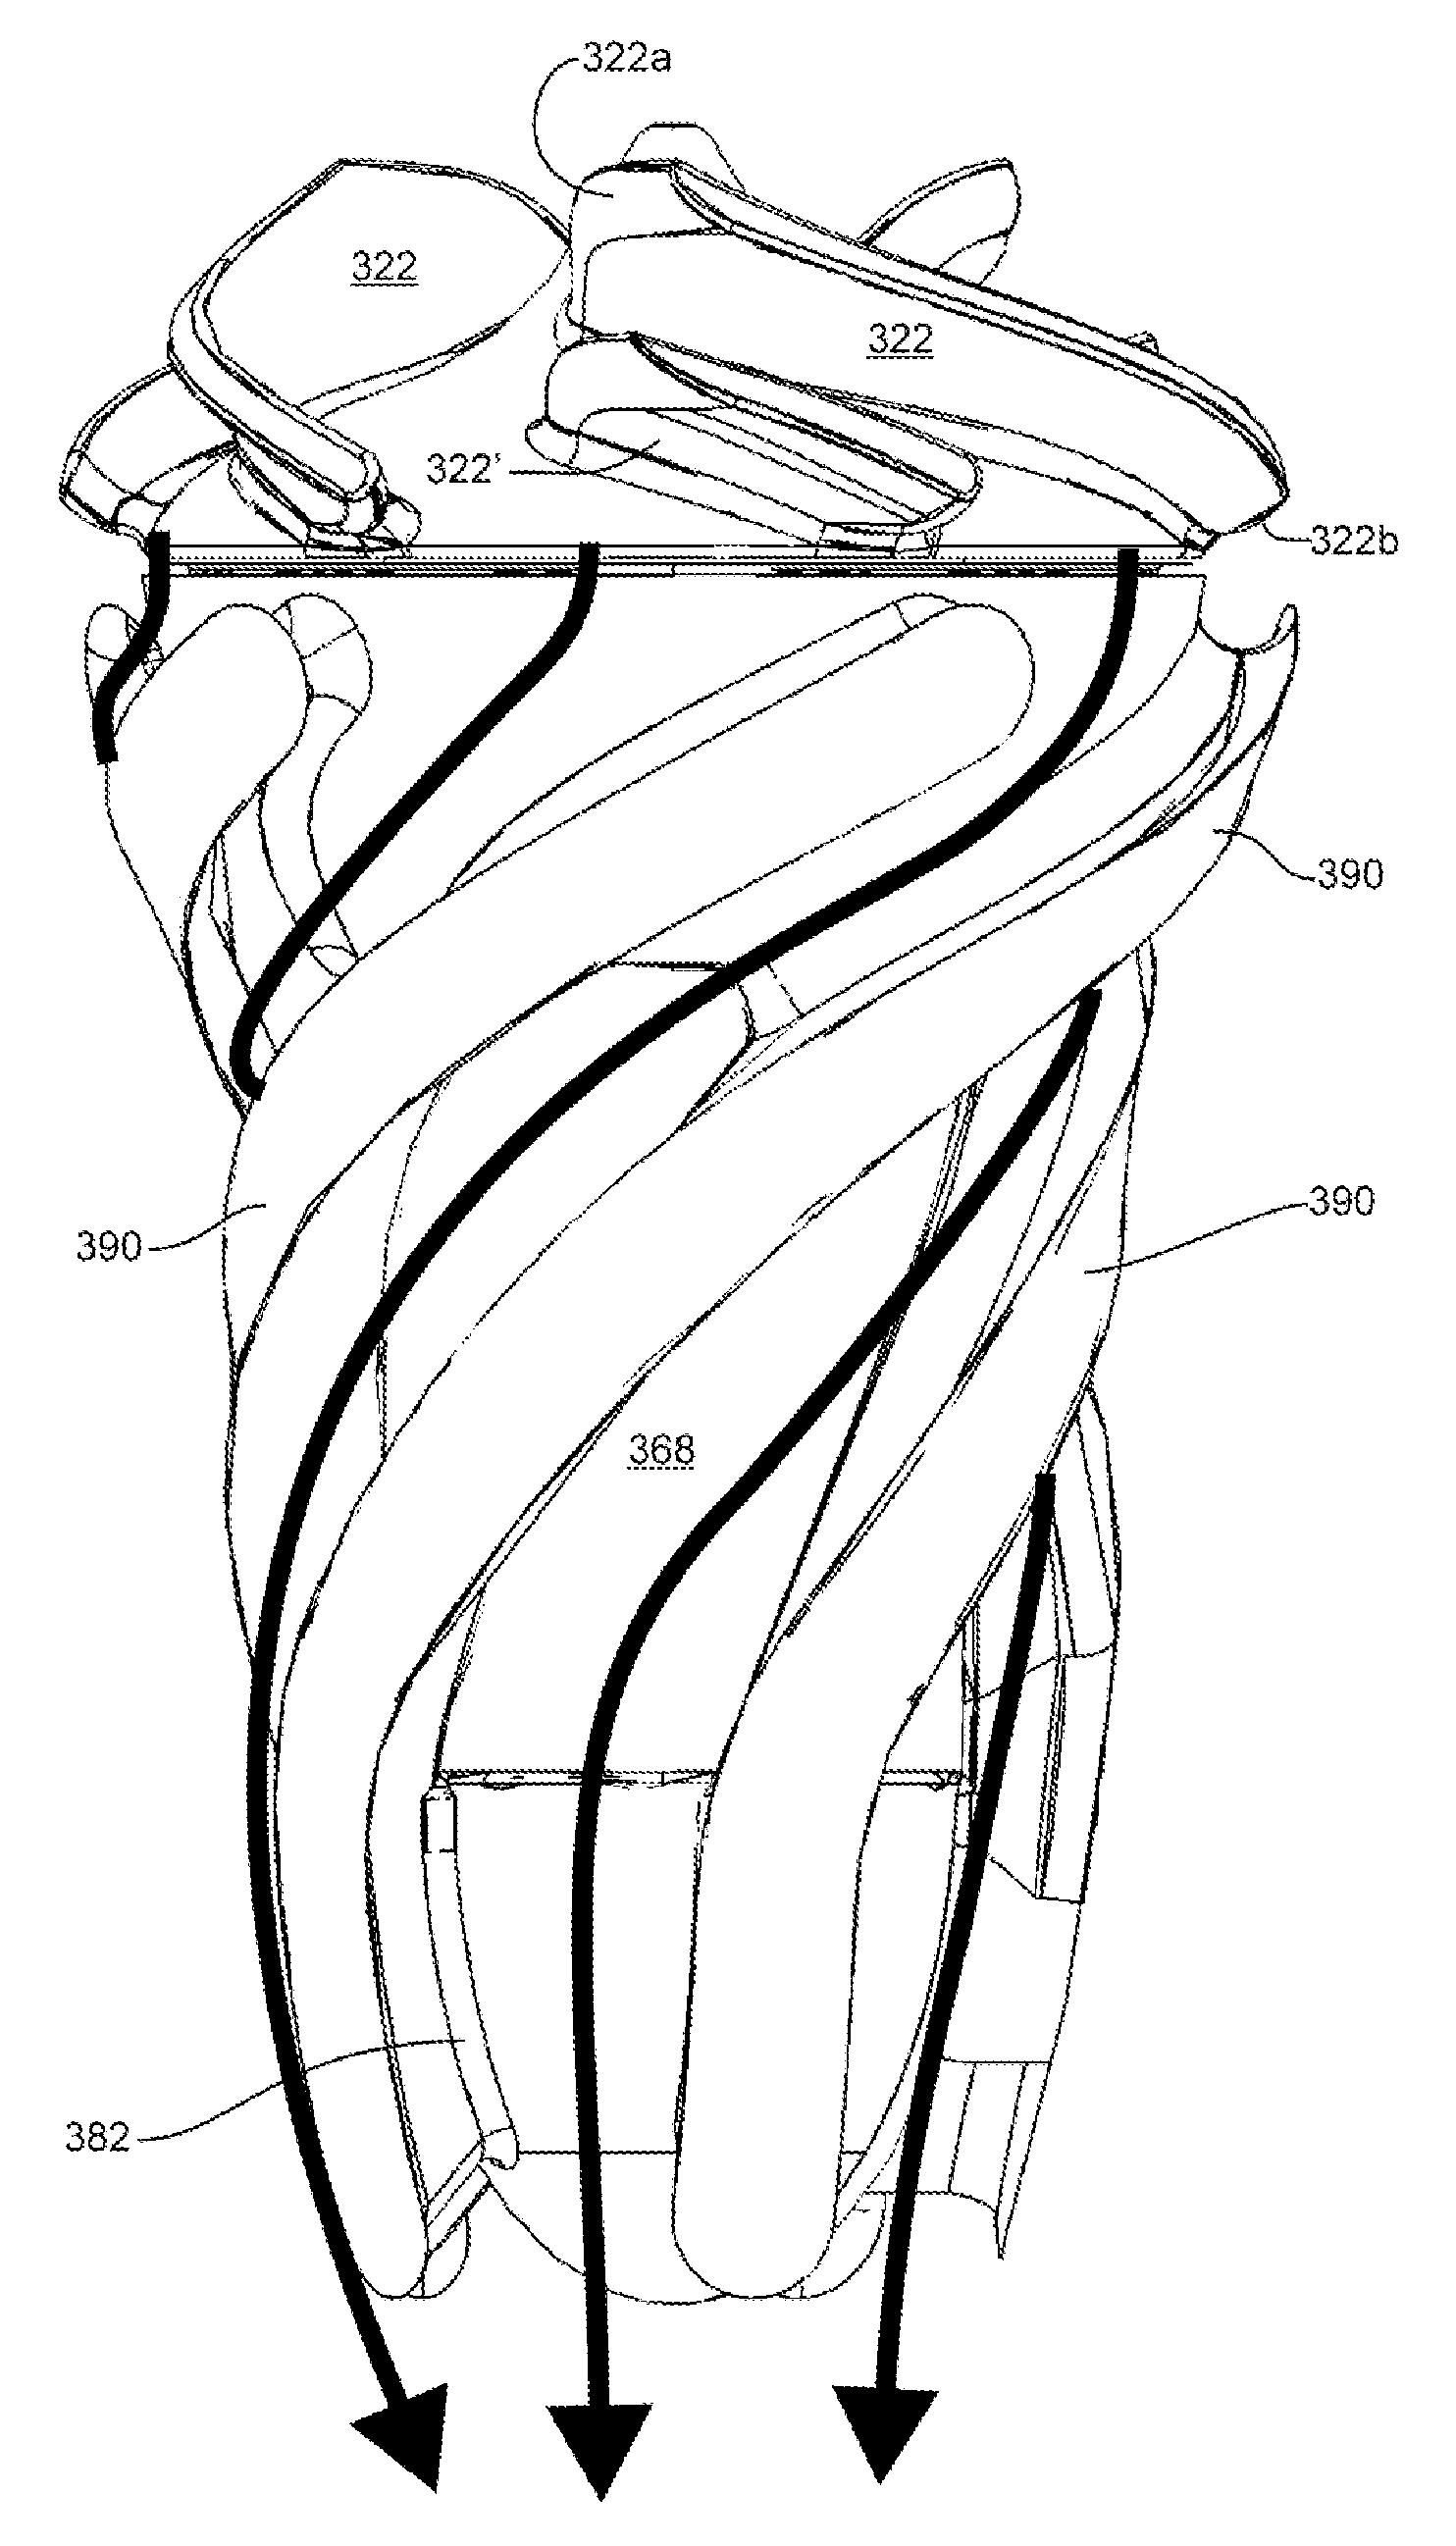 Impeller for a wearable positive airway pressure device